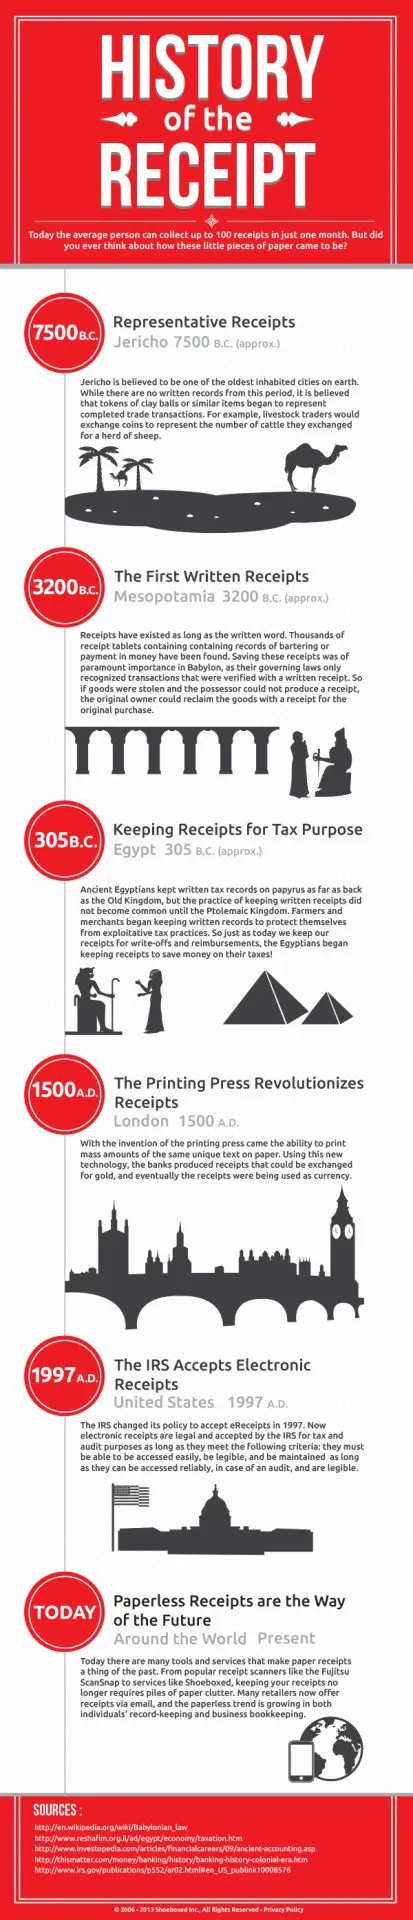 Infographic: The history of the receipt.